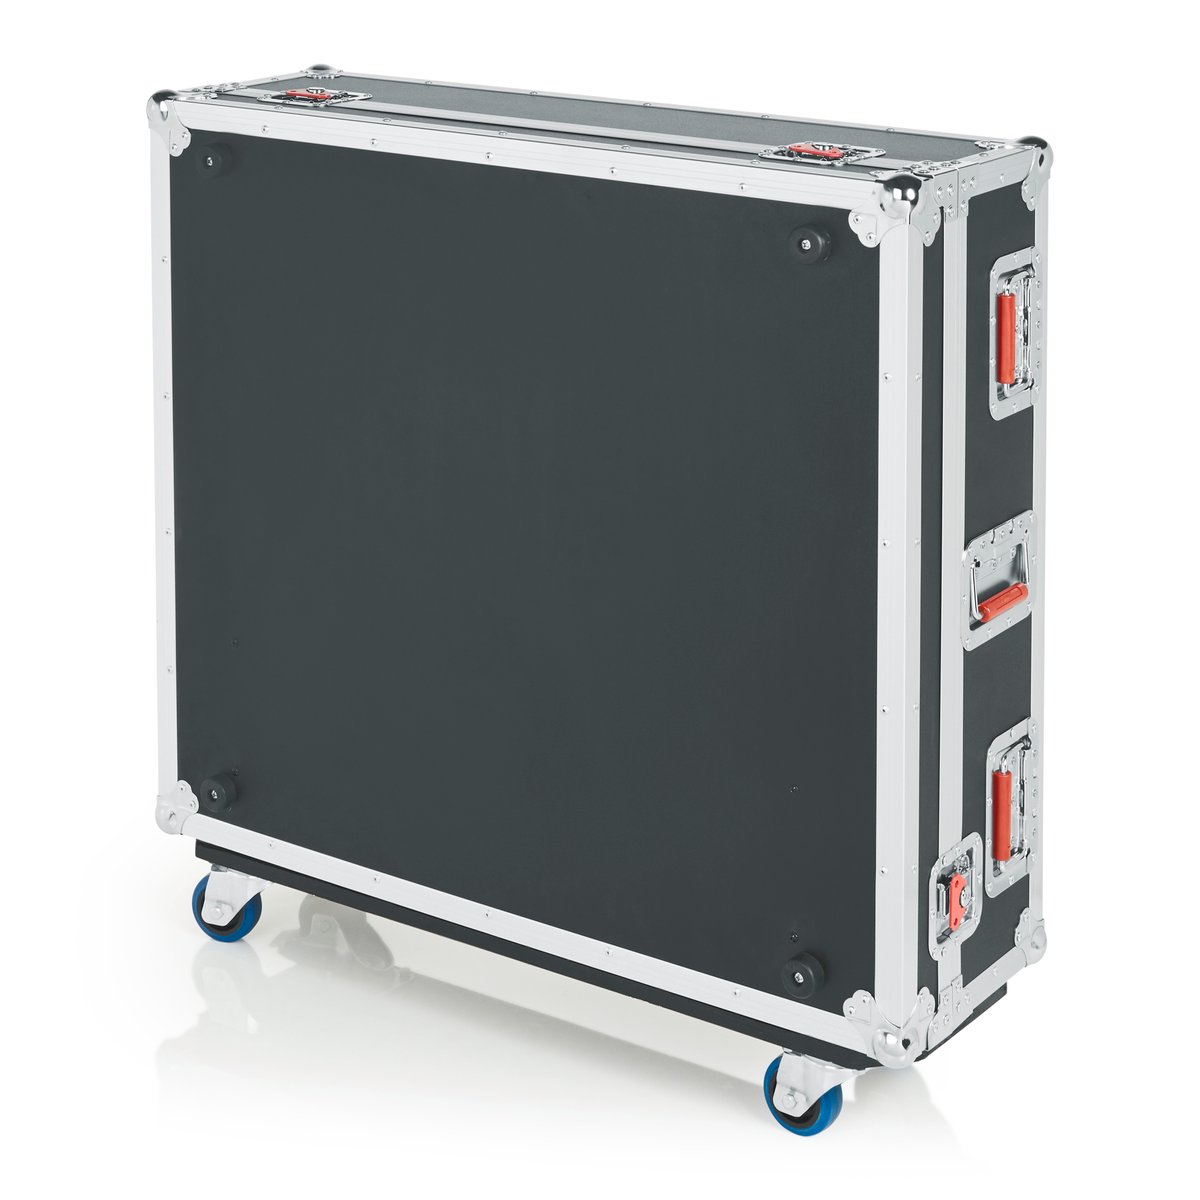 G-Tour Flight Case for Behringer Wing Mixer. Includes Casters and Doghouse.